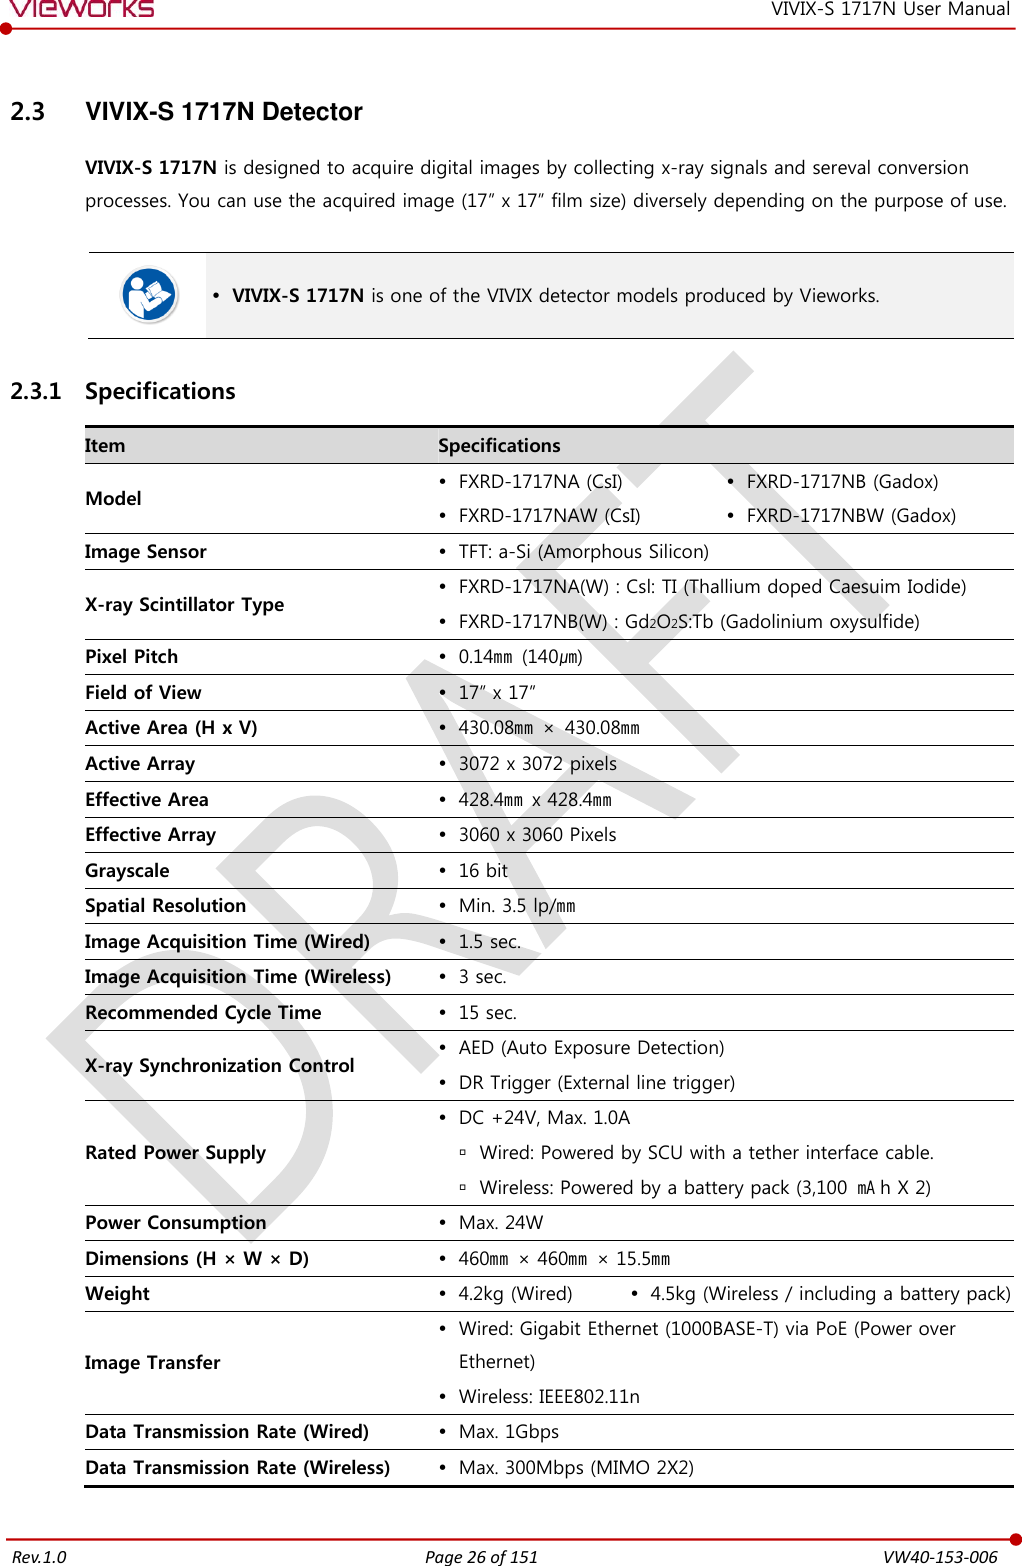   Rev.1.0 Page 26 of 151  VW40-153-006 VIVIX-S 1717N User Manual 2.3  VIVIX-S 1717N Detector VIVIX-S 1717N is designed to acquire digital images by collecting x-ray signals and sereval conversion processes. You can use the acquired image (17” x 17” film size) diversely depending on the purpose of use.    VIVIX-S 1717N is one of the VIVIX detector models produced by Vieworks. 2.3.1 Specifications Item Specifications Model  FXRD-1717NA (CsI)  FXRD-1717NAW (CsI)  FXRD-1717NB (Gadox)  FXRD-1717NBW (Gadox) Image Sensor  TFT: a-Si (Amorphous Silicon) X-ray Scintillator Type  FXRD-1717NA(W) : Csl: TI (Thallium doped Caesuim Iodide)  FXRD-1717NB(W) : Gd2O2S:Tb (Gadolinium oxysulfide) Pixel Pitch  0.14㎜ (140㎛) Field of View  17” x 17” Active Area (H x V)  430.08㎜ × 430.08㎜ Active Array  3072 x 3072 pixels Effective Area  428.4㎜ x 428.4㎜ Effective Array  3060 x 3060 Pixels Grayscale  16 bit Spatial Resolution  Min. 3.5 lp/㎜ Image Acquisition Time (Wired)  1.5 sec. Image Acquisition Time (Wireless)  3 sec. Recommended Cycle Time  15 sec. X-ray Synchronization Control  AED (Auto Exposure Detection)  DR Trigger (External line trigger) Rated Power Supply  DC +24V, Max. 1.0A  Wired: Powered by SCU with a tether interface cable.  Wireless: Powered by a battery pack (3,100  ㎃h X 2) Power Consumption  Max. 24W Dimensions (H × W × D)  460㎜ × 460㎜ × 15.5㎜ Weight  4.2kg (Wired)  4.5kg (Wireless / including a battery pack) Image Transfer  Wired: Gigabit Ethernet (1000BASE-T) via PoE (Power over Ethernet)  Wireless: IEEE802.11n Data Transmission Rate (Wired)  Max. 1Gbps Data Transmission Rate (Wireless)  Max. 300Mbps (MIMO 2X2) 